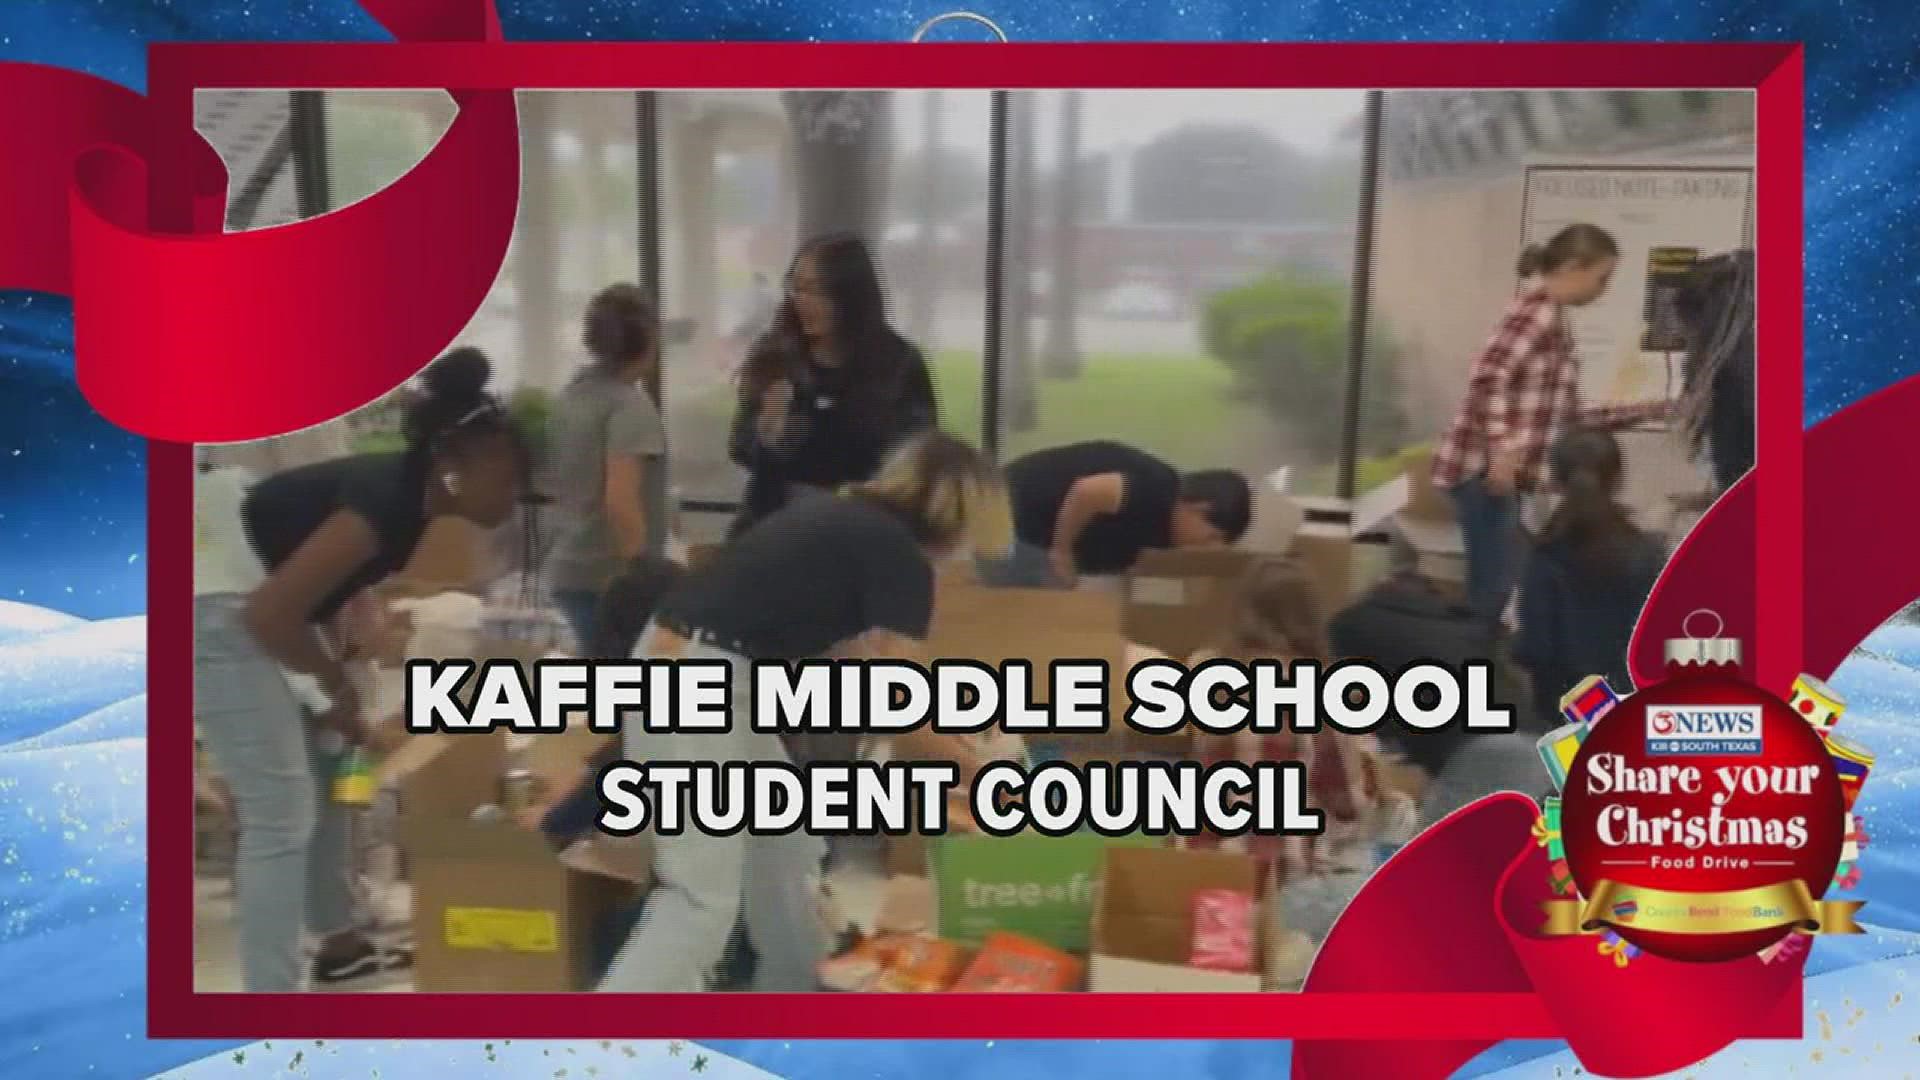 The Kaffie Middle School Student Council is the latest addition to our on-air Share Your Christmas showcase! Want to be next? Show us what you got!